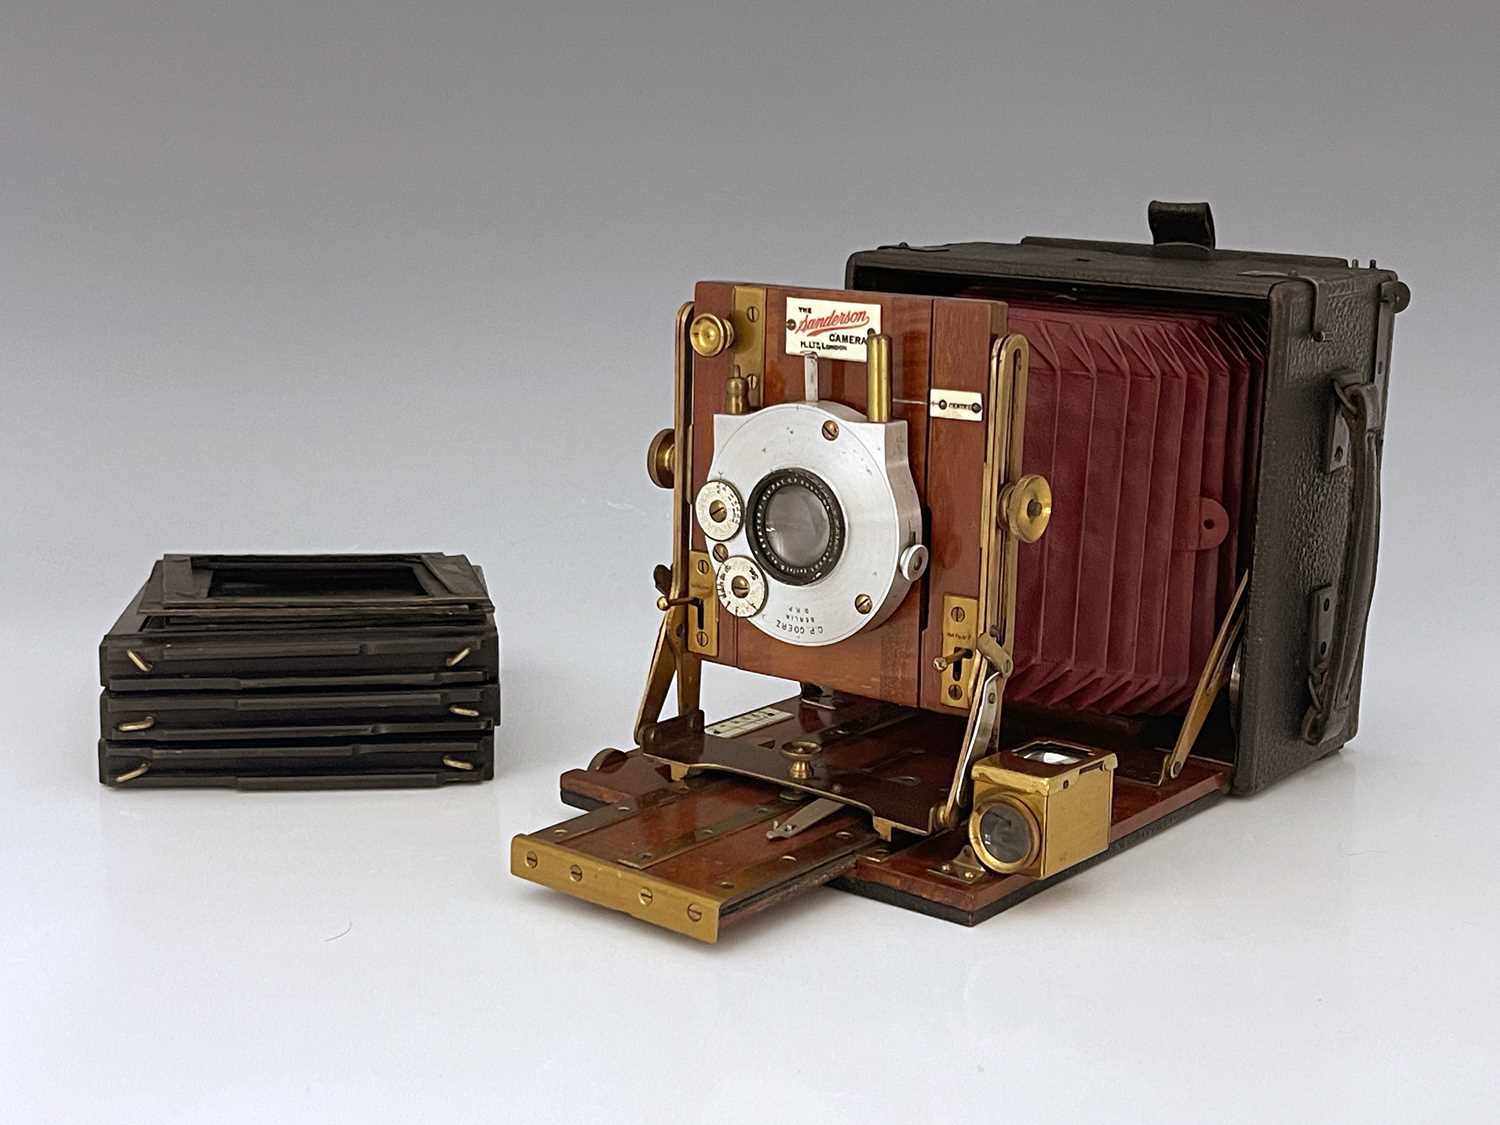 A Sanderson 4x5 Field concertina camera, red bellows, brass, and mahogany fittings with a C.P. Goerz